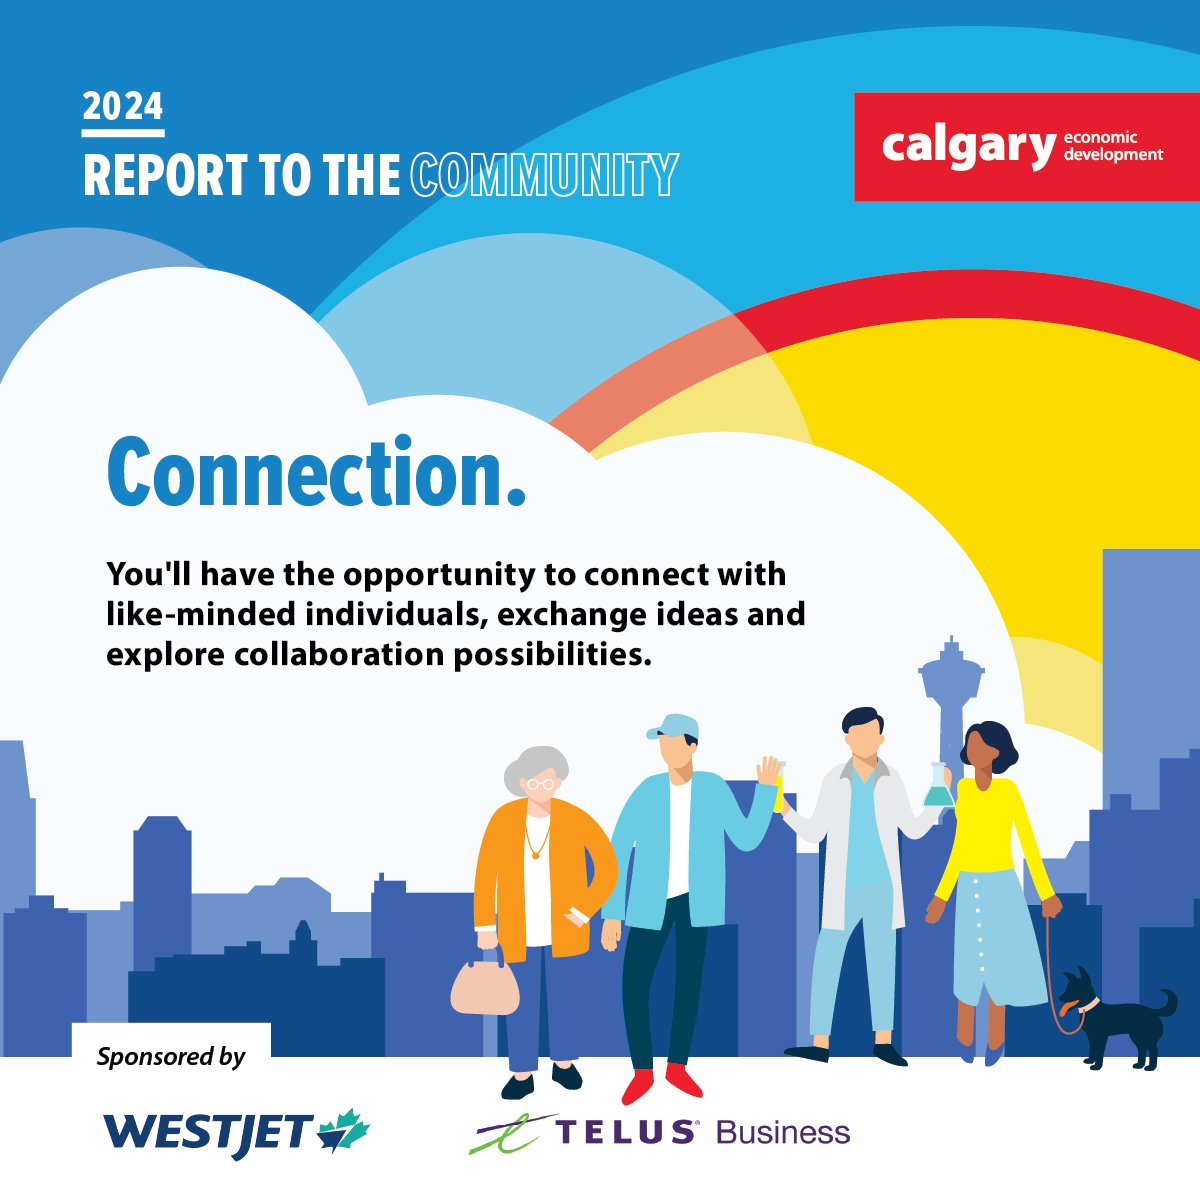 We’re excited to be supporting Calgary Economic Development as it hosts Report to the Community on April 17. Join us as we celebrate everything Calgary is and can become. Get your tickets today ➤ rtc.calgaryeconomicdevelopment.com. #RTC2024 #NewEconomy #FutureProof